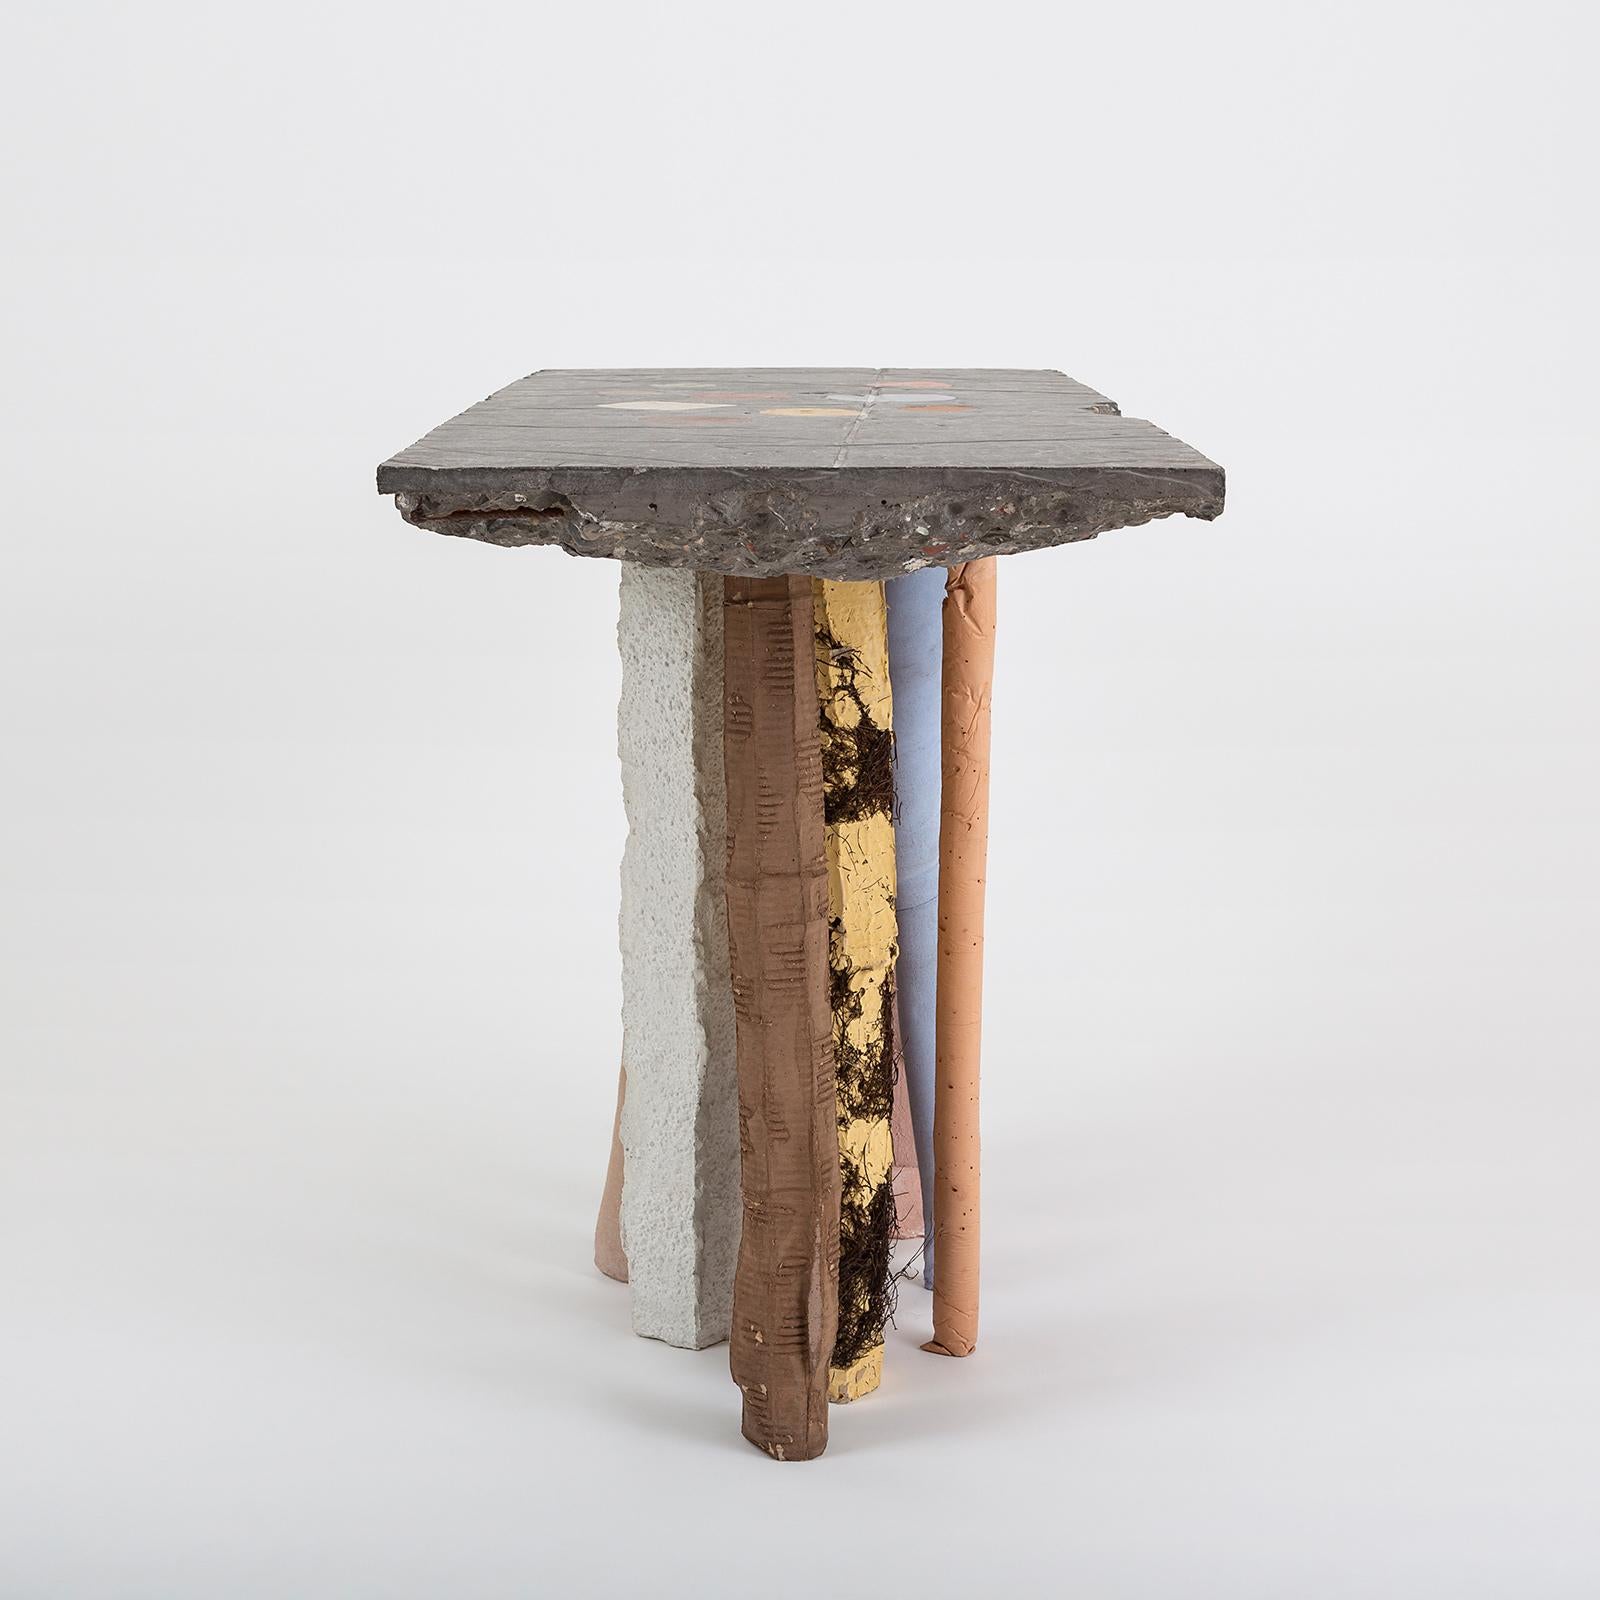 Modern Fossil Console in Concrete by Nacho Carbonell